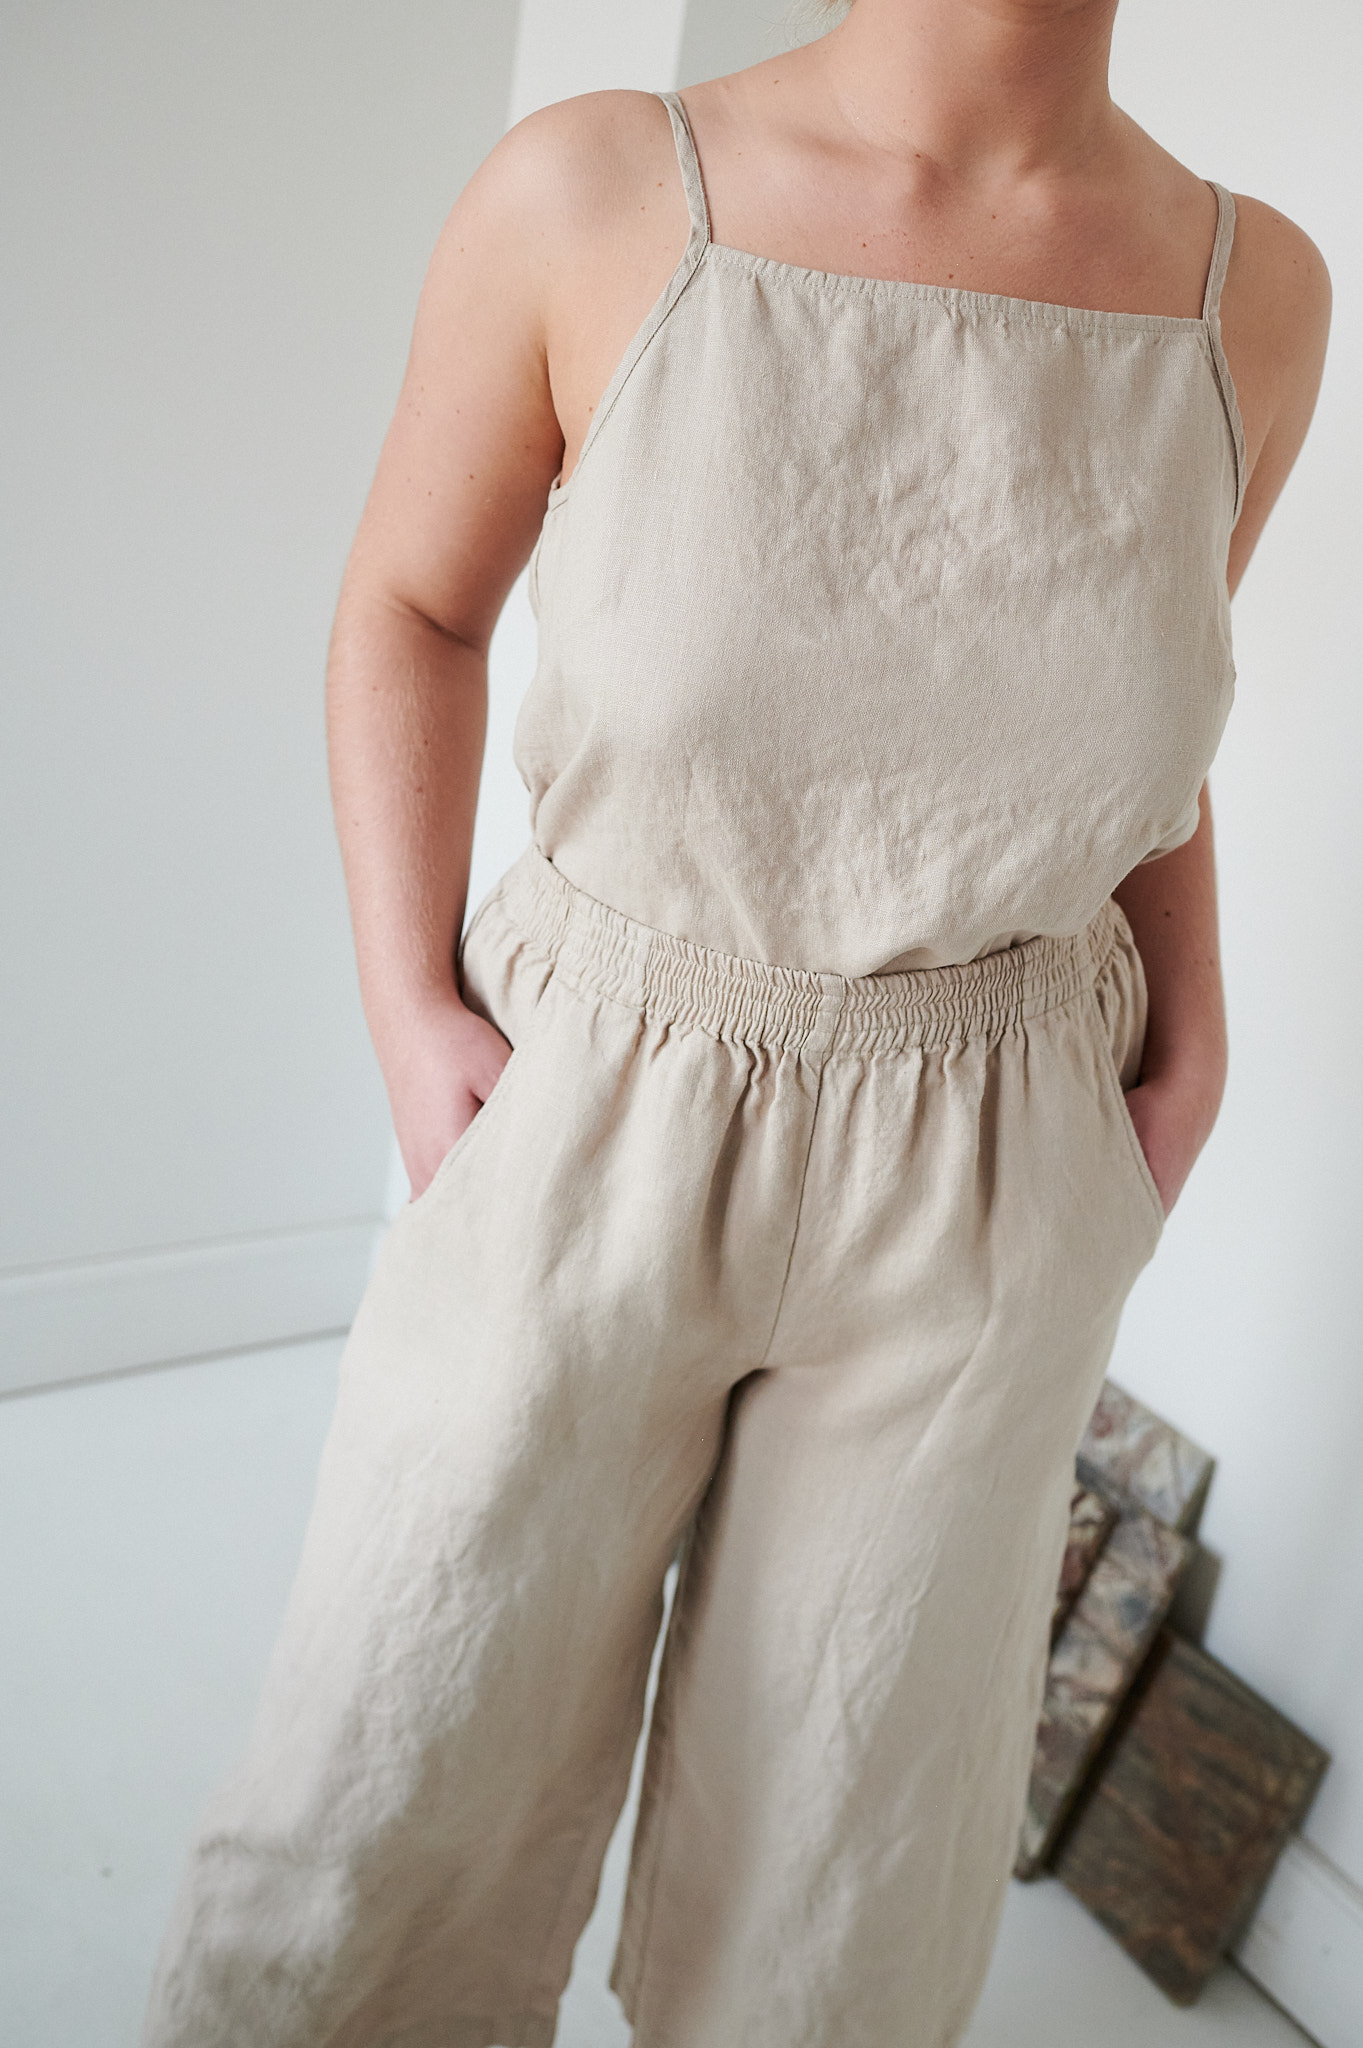 Elasticated waist trousers in beige linen with a matching top